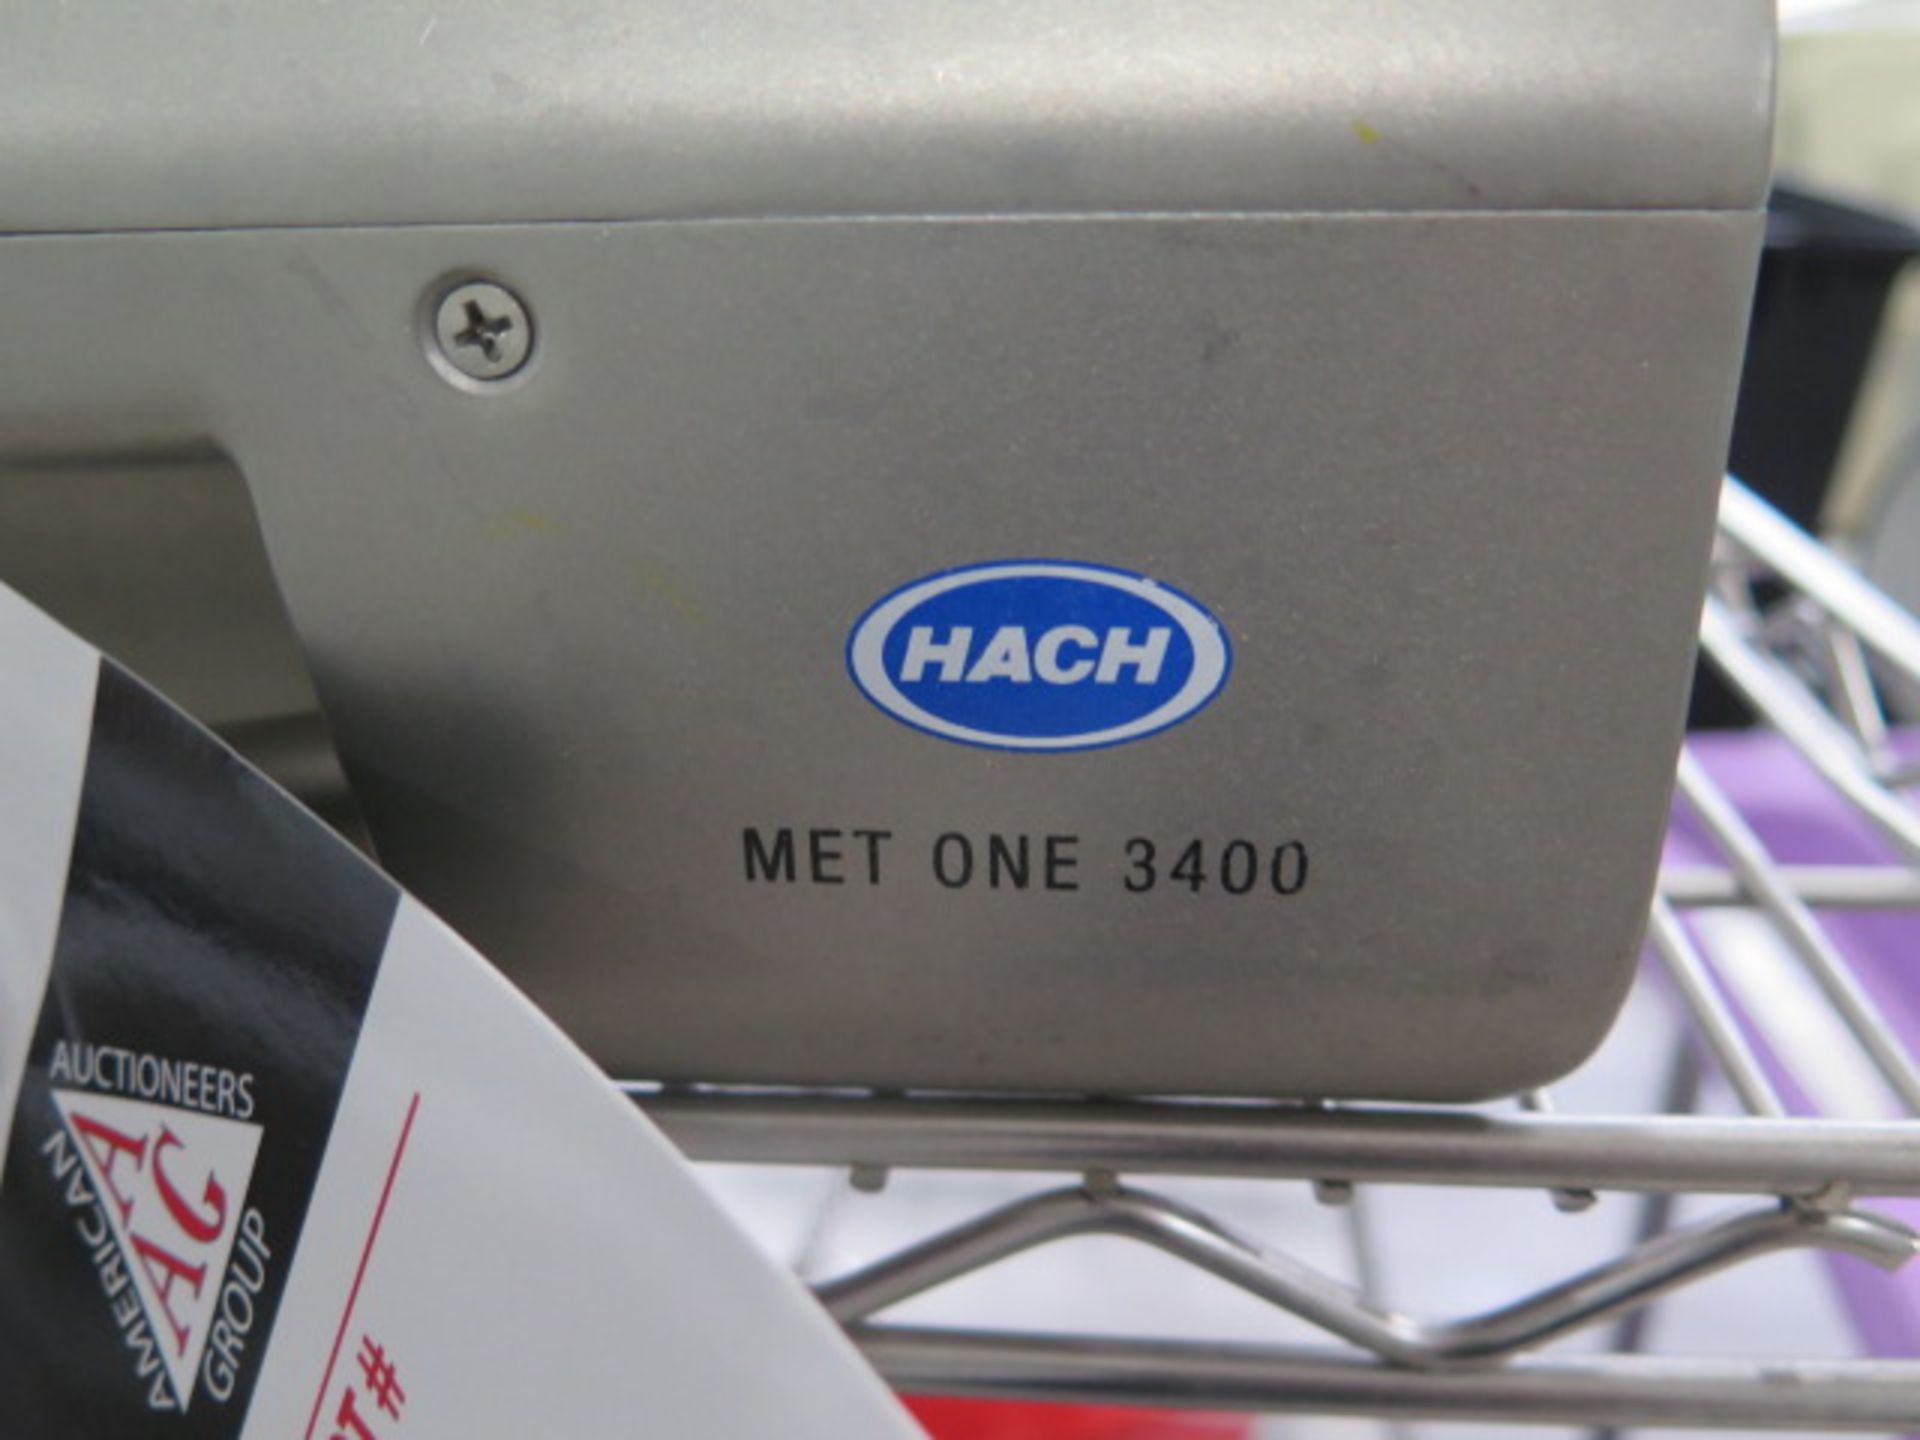 Hach MET ONE 3400 mdl. 3445 Particle Counter w/ Printer (SOLD AS-IS - NO WARRANTY) - Image 6 of 6